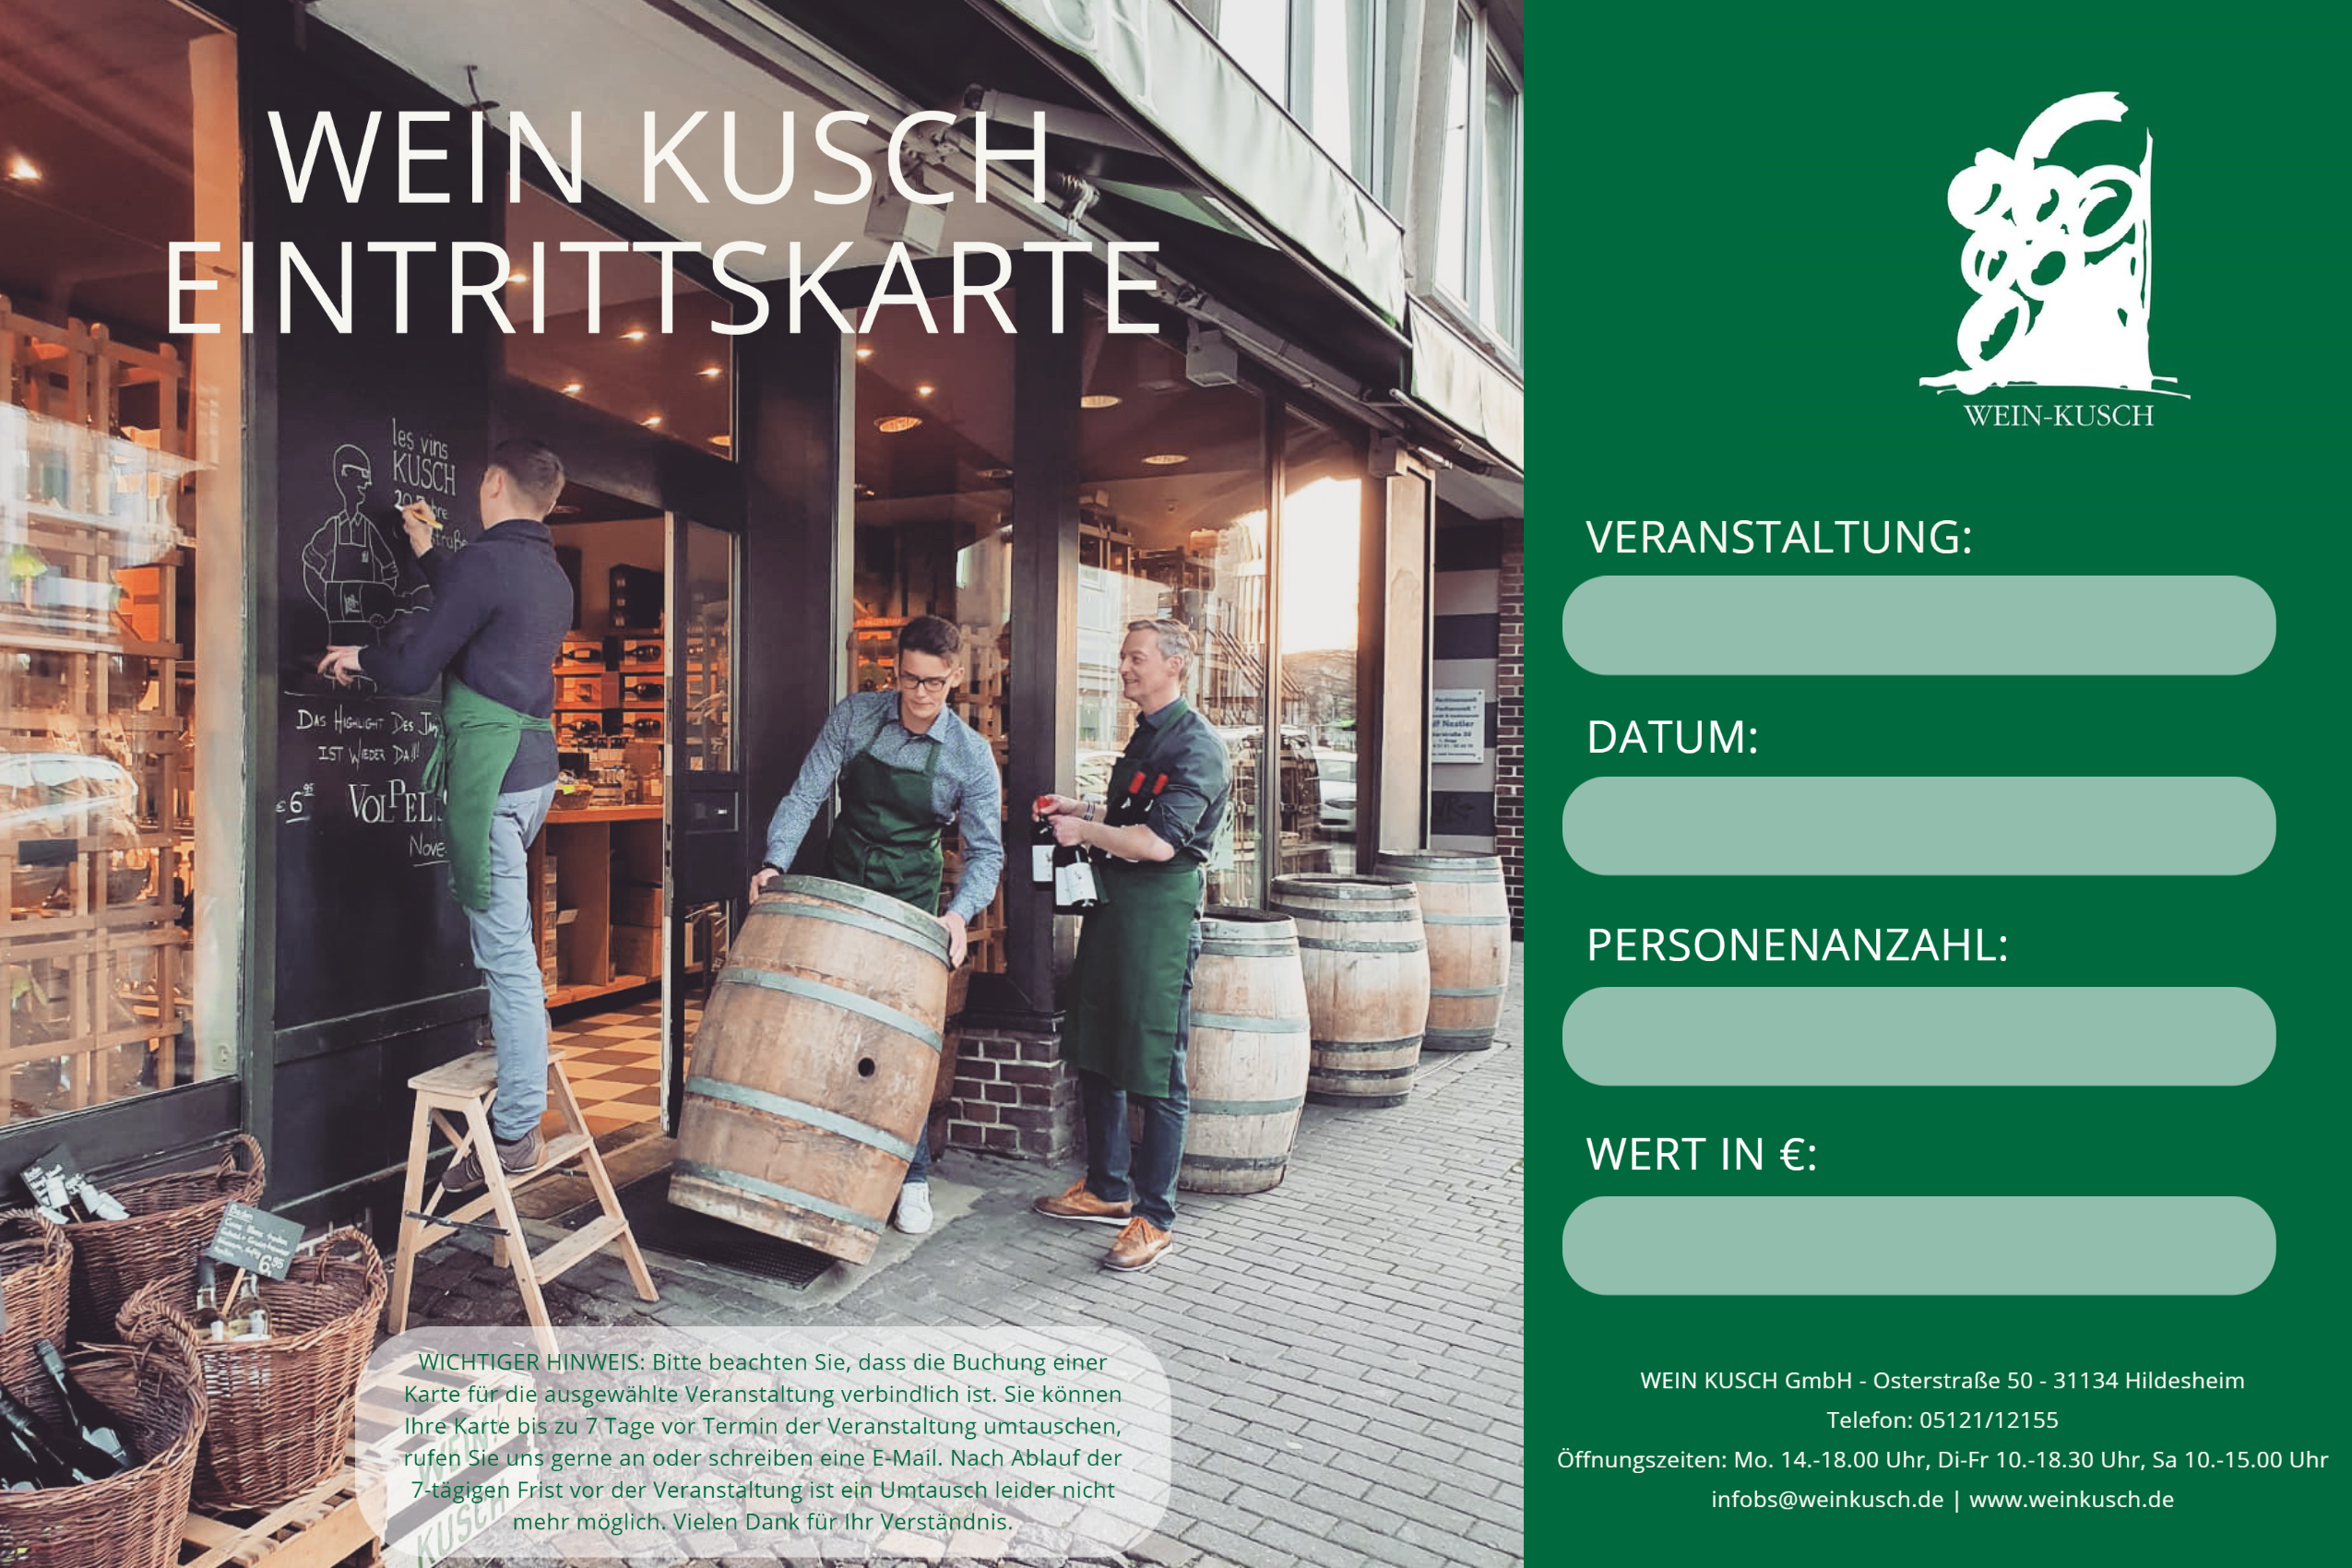 2022.08.26 - Rum Tasting Deluxe – Limited Editions in Hildesheim 19.00 Uhr